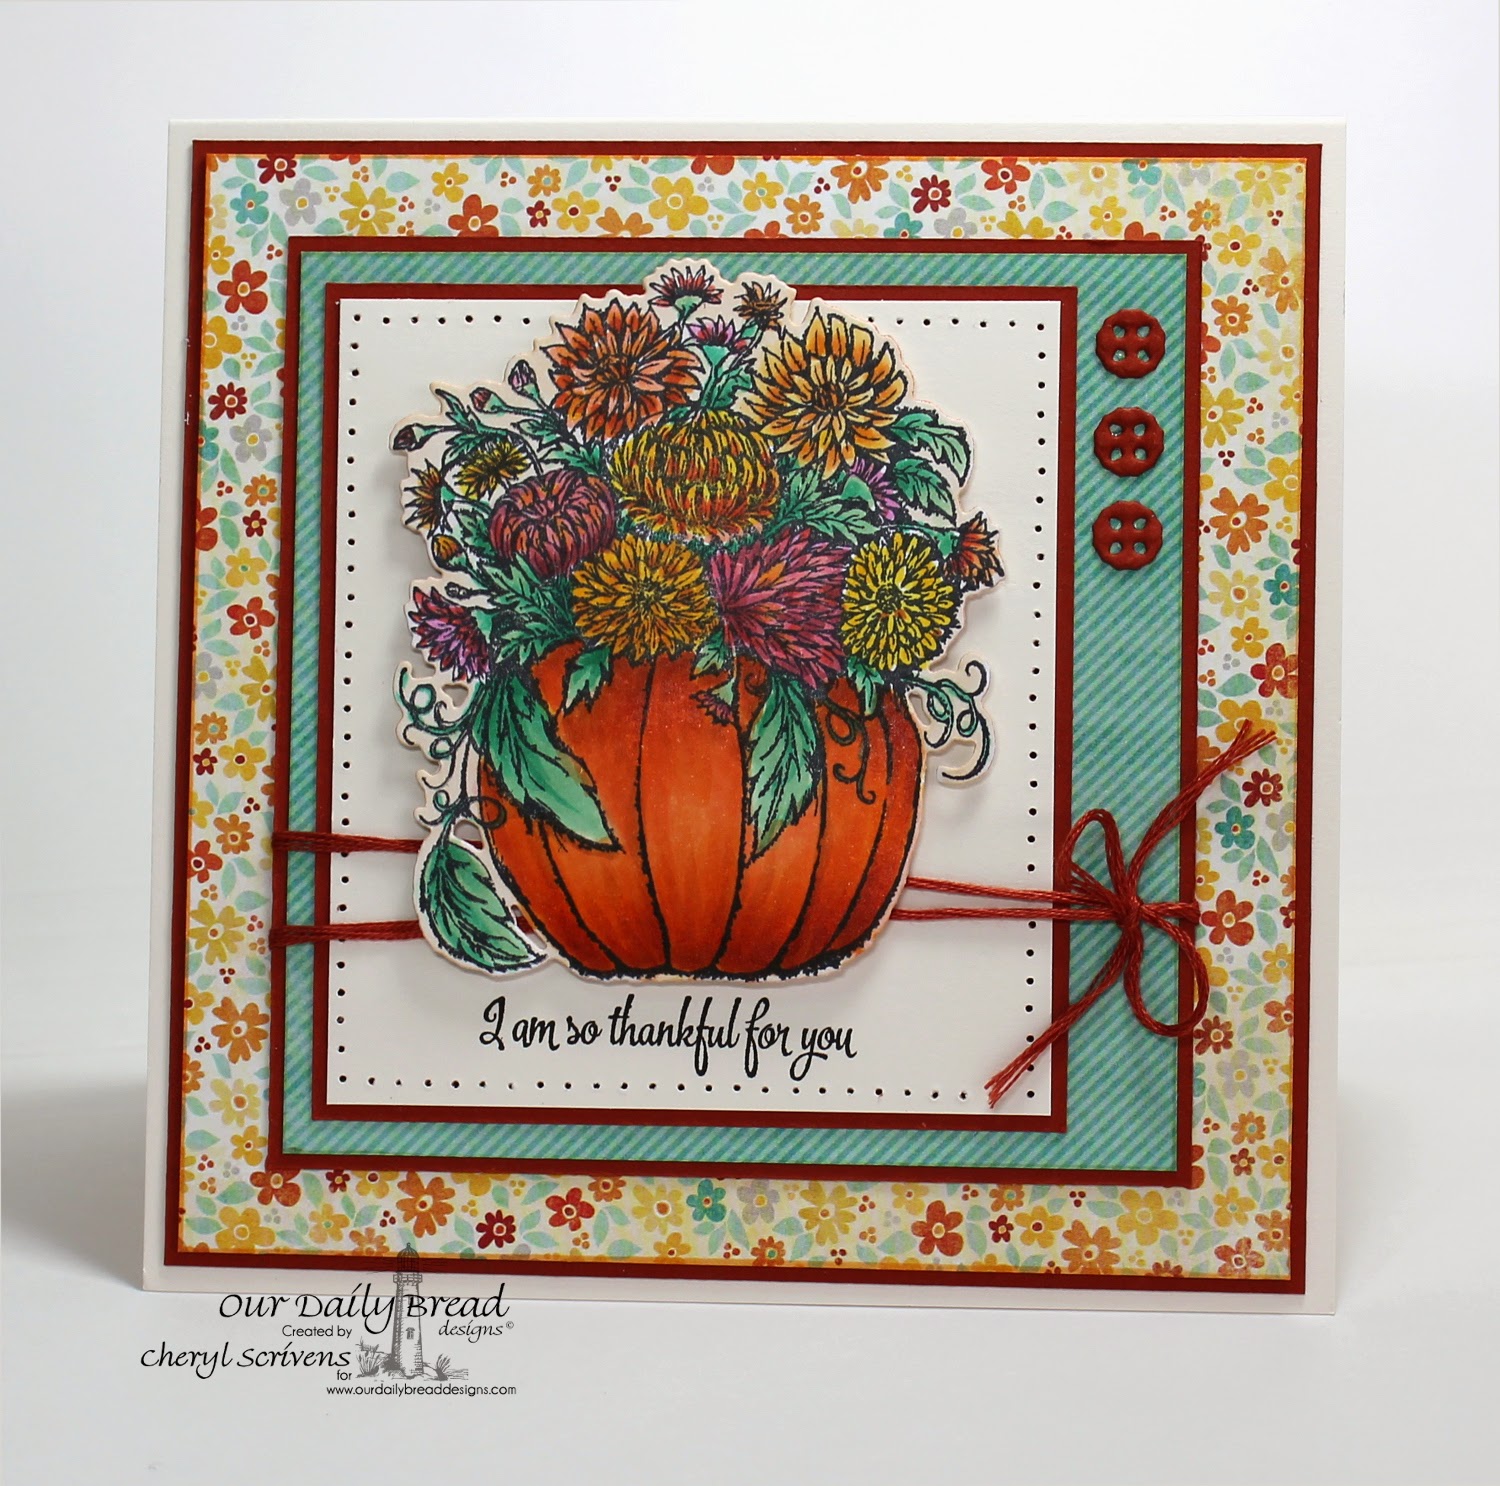 Our Daily Bread Designs, ODBDSLC214, Pumpkin with Flowers, Pumpkin with Flowers die, Doily Blessings, Doily dies, CherylQuilts, Designed by Cheryl Scrivens